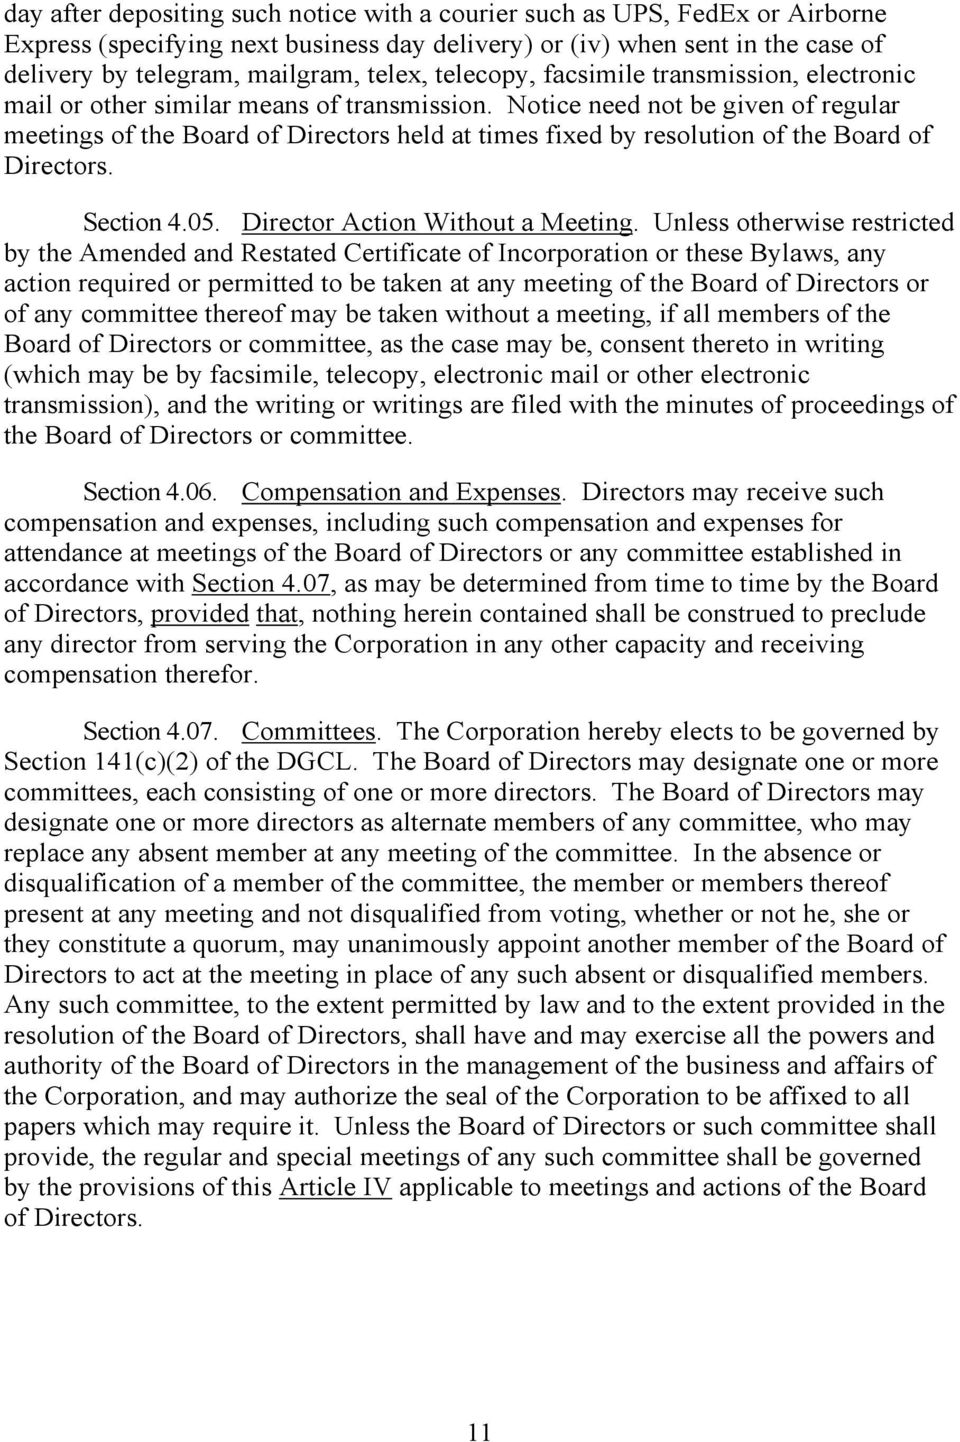 Notice need not be given of regular meetings of the Board of Directors held at times fixed by resolution of the Board of Directors. Section 4.05. Director Action Without a Meeting.